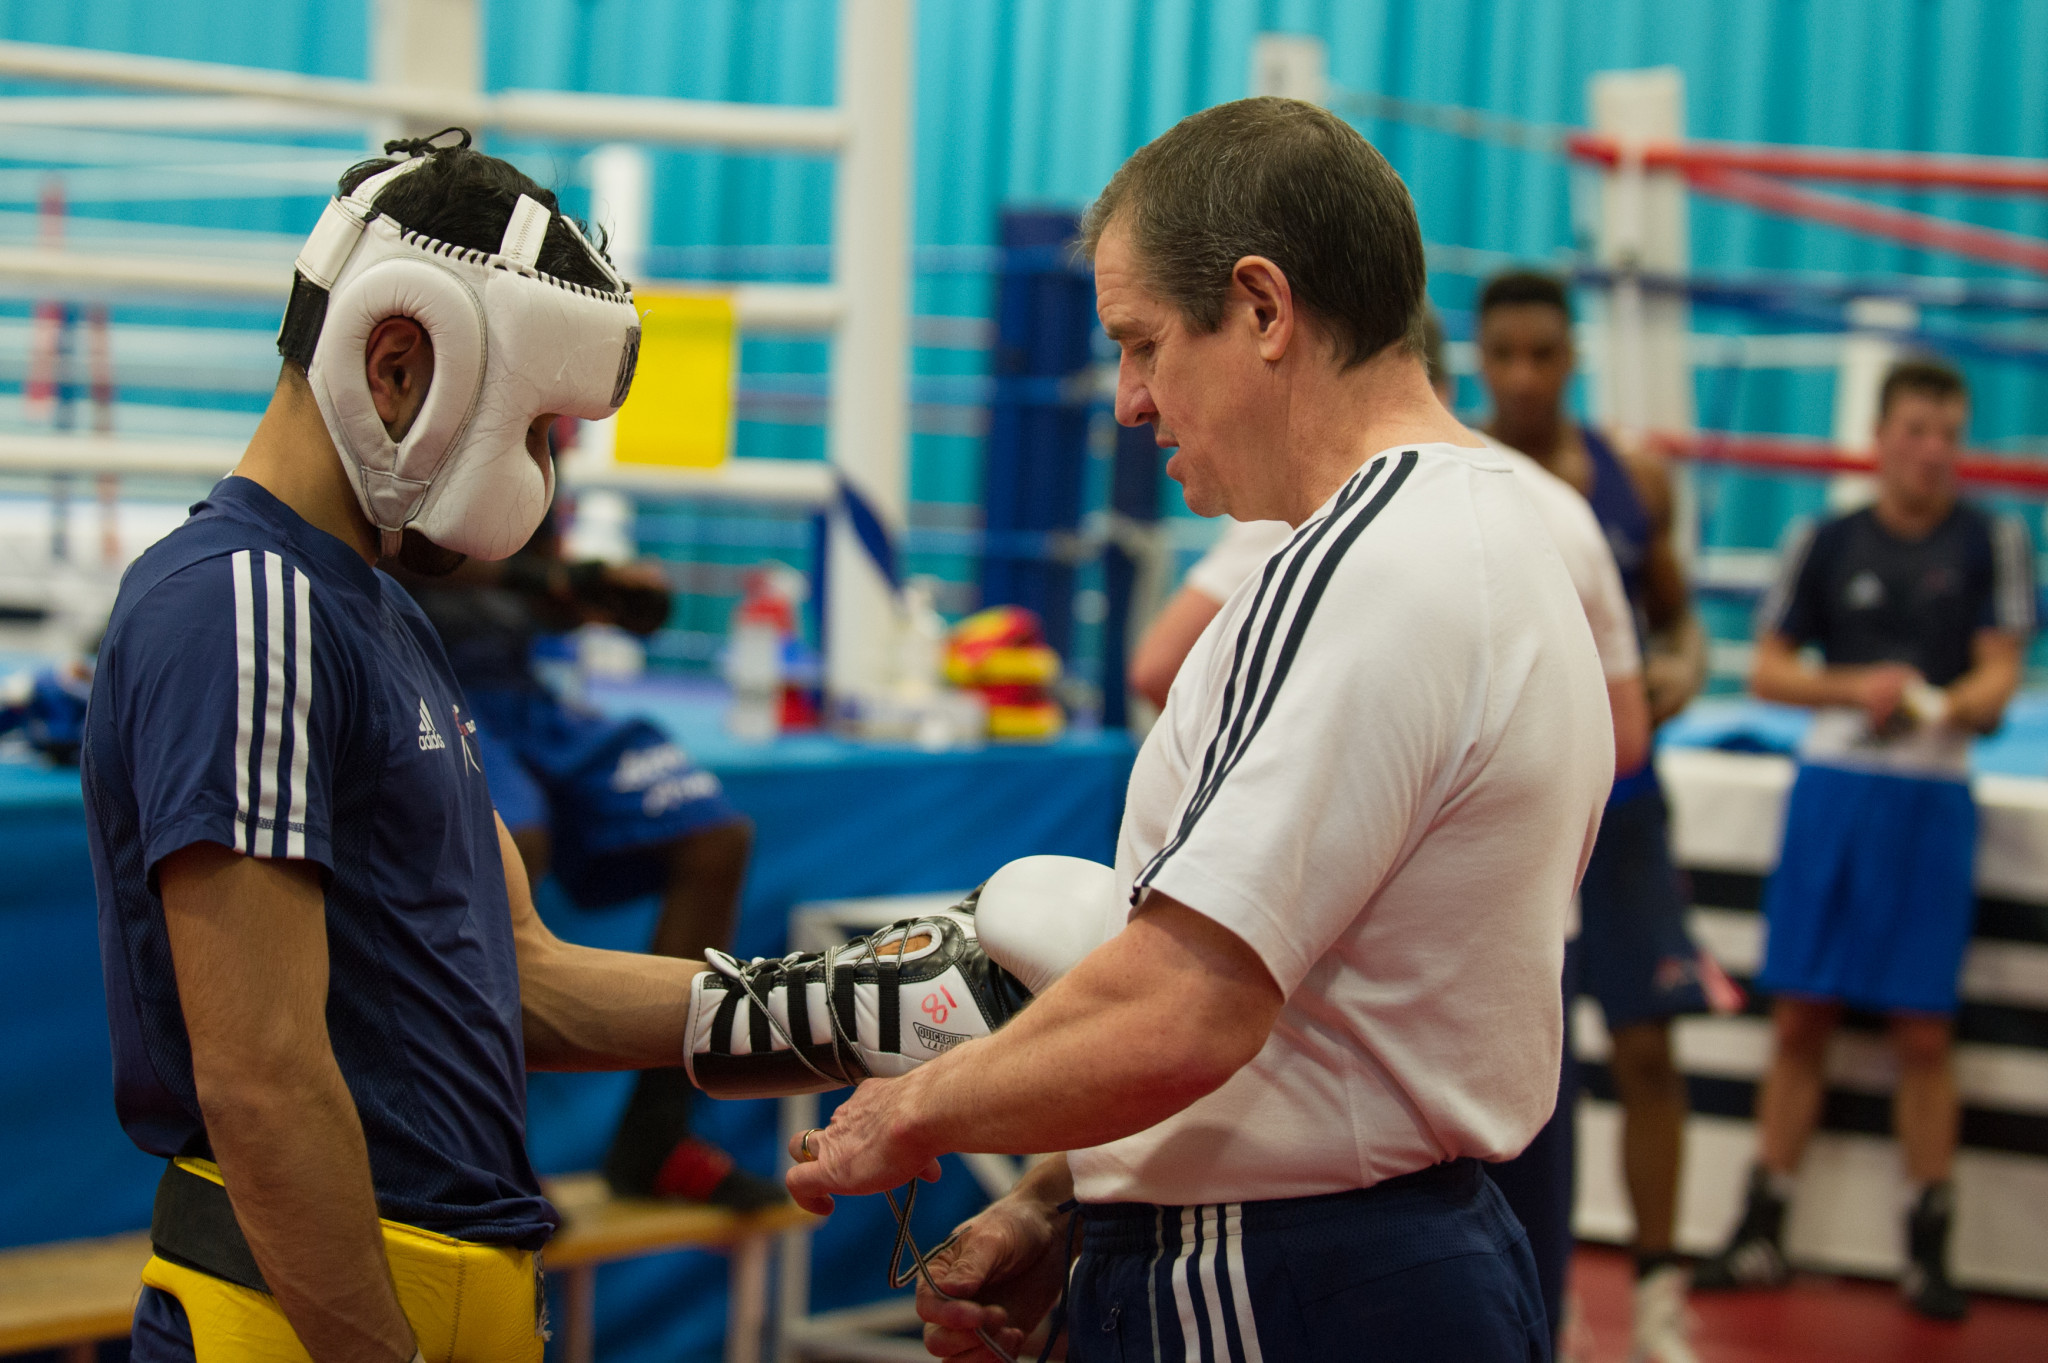 Paul Walmsley, left, has played a big part in Britain's boxing success over the past decade ©GB Boxing